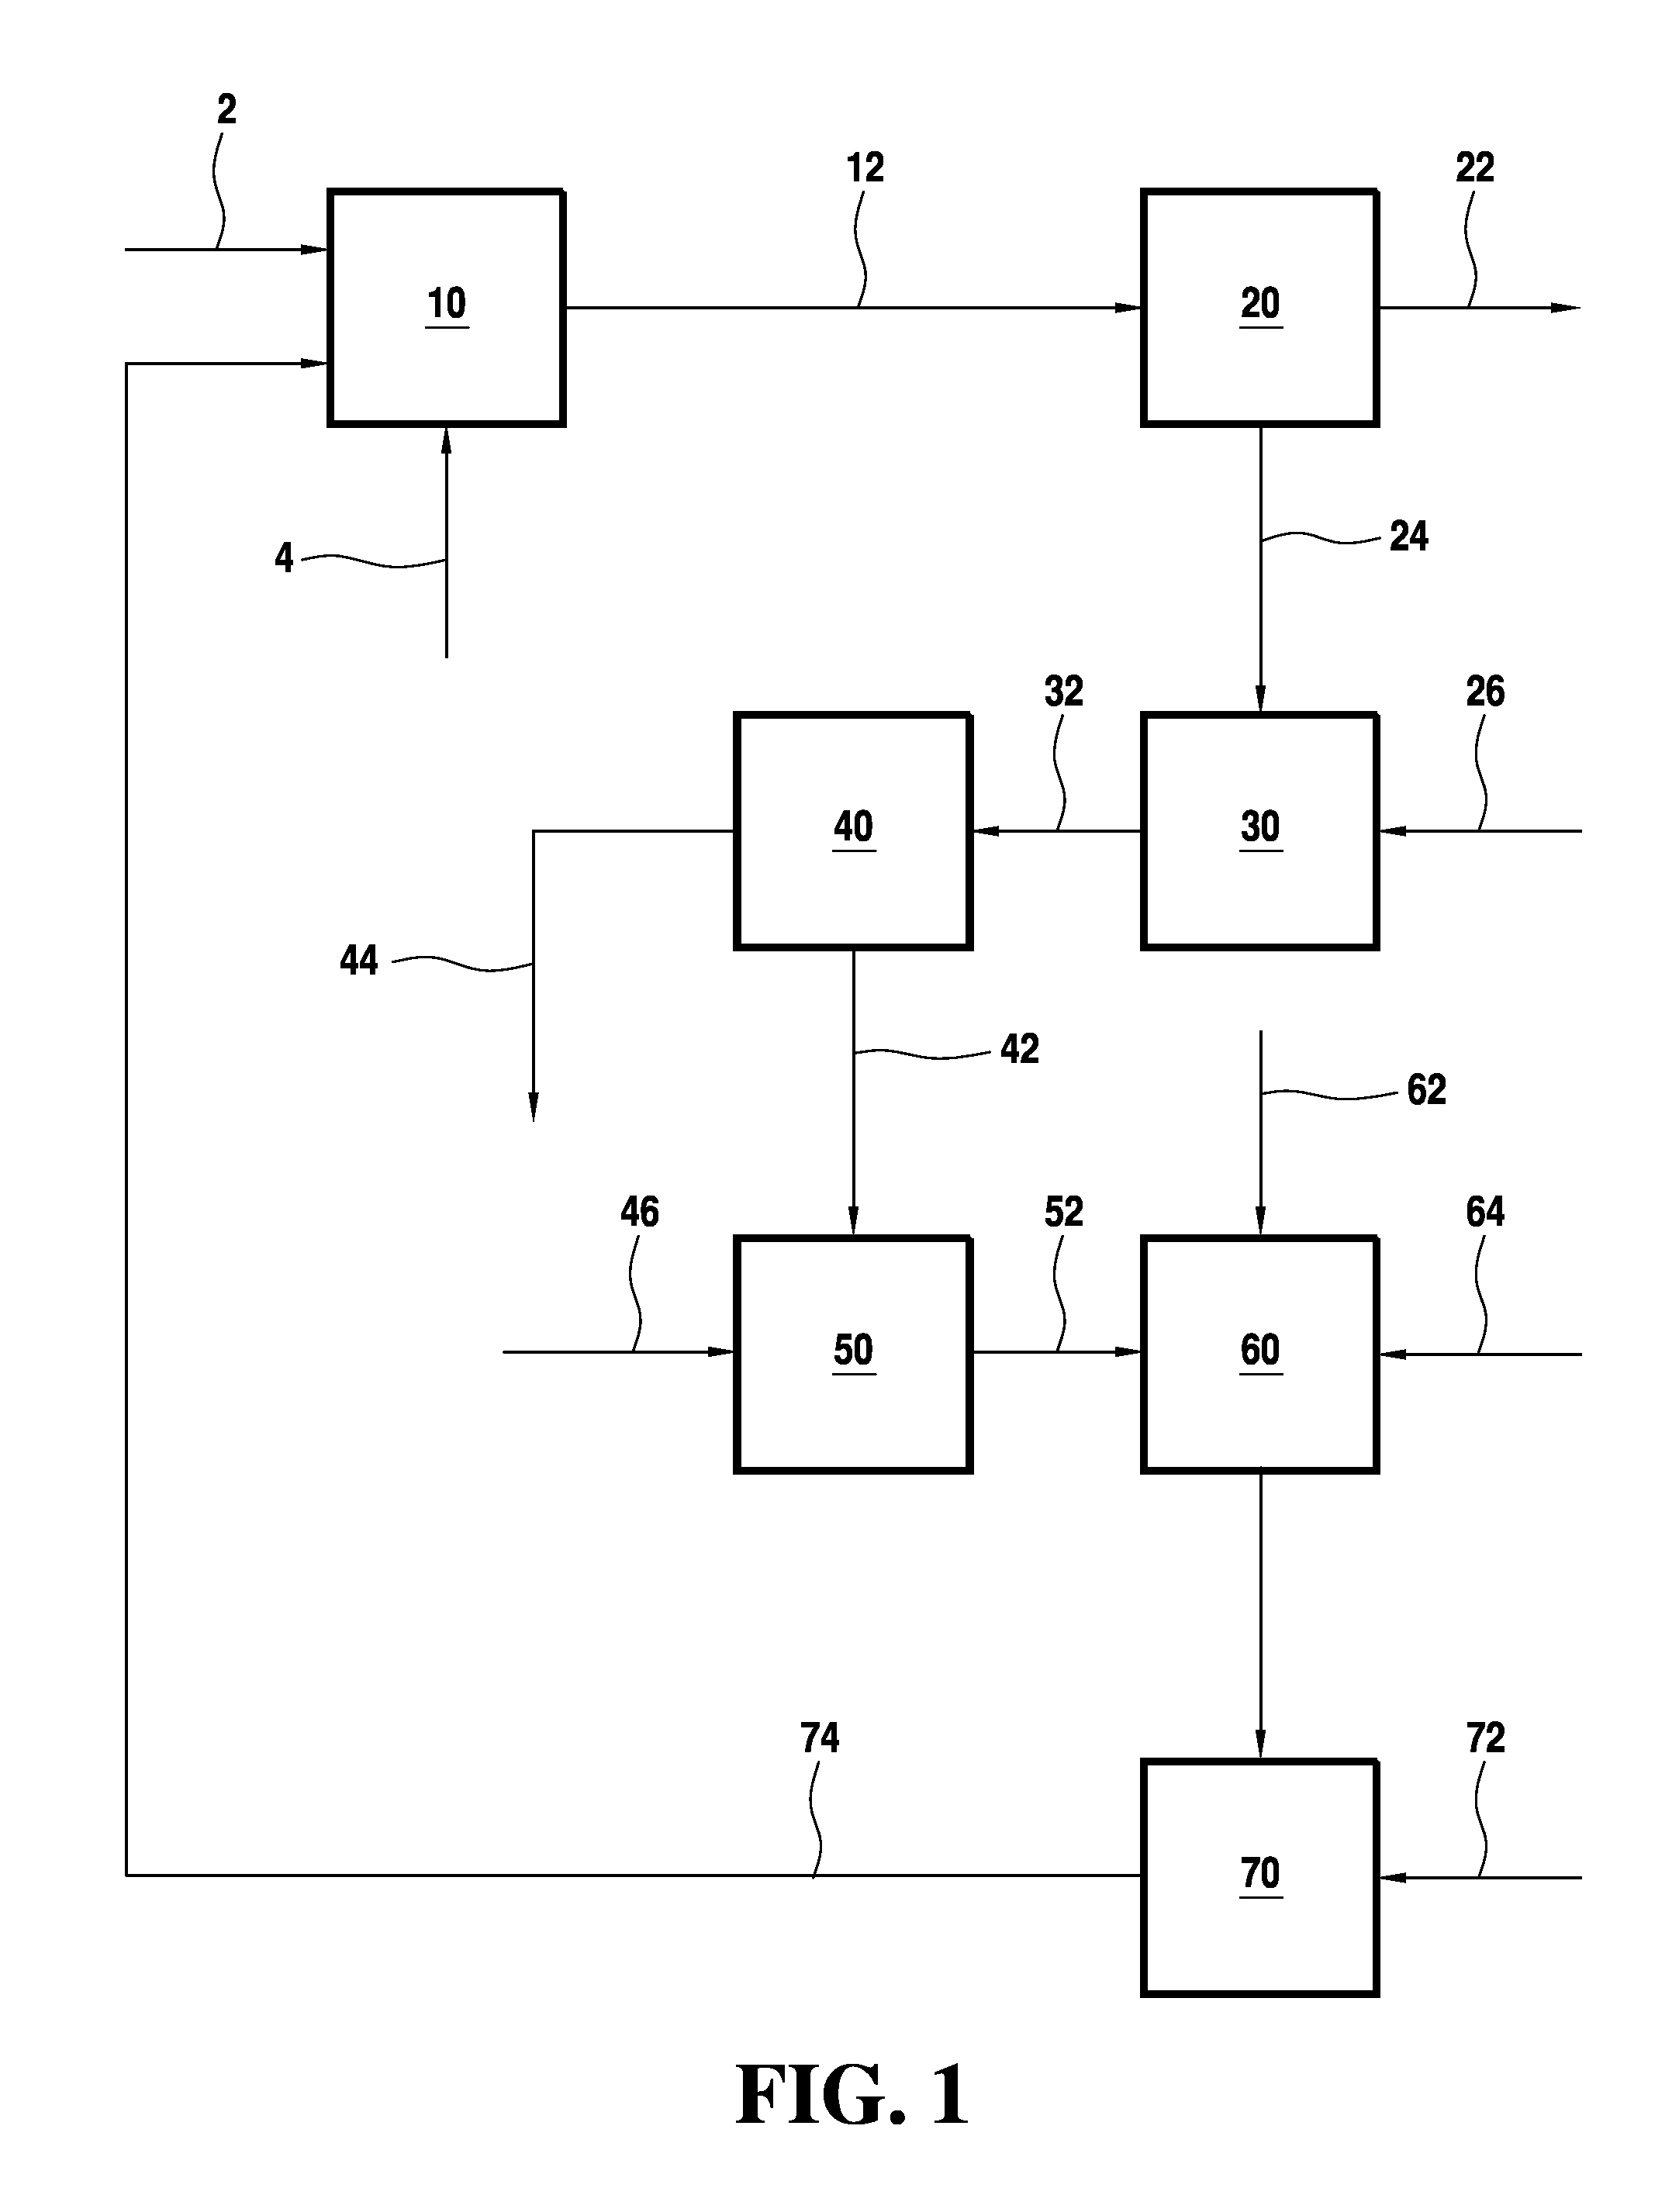 Integrated process for producing polyvinyl alcohol or a copolymer thereof and ethanol